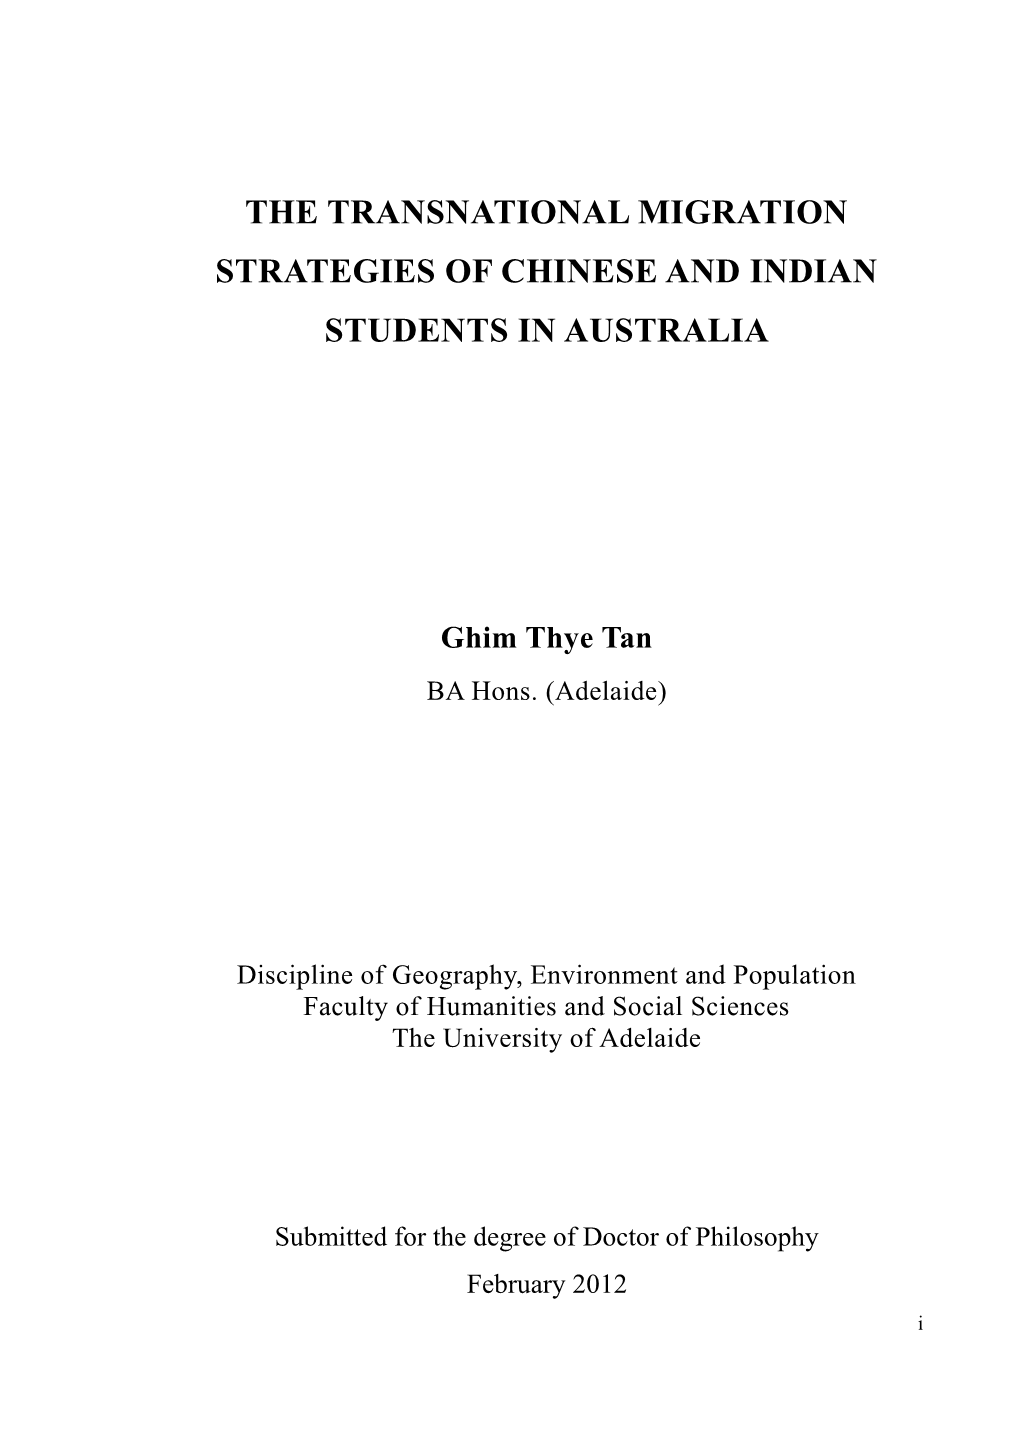 The Transnational Migration Strategies of Chinese and Indian Students in Australia